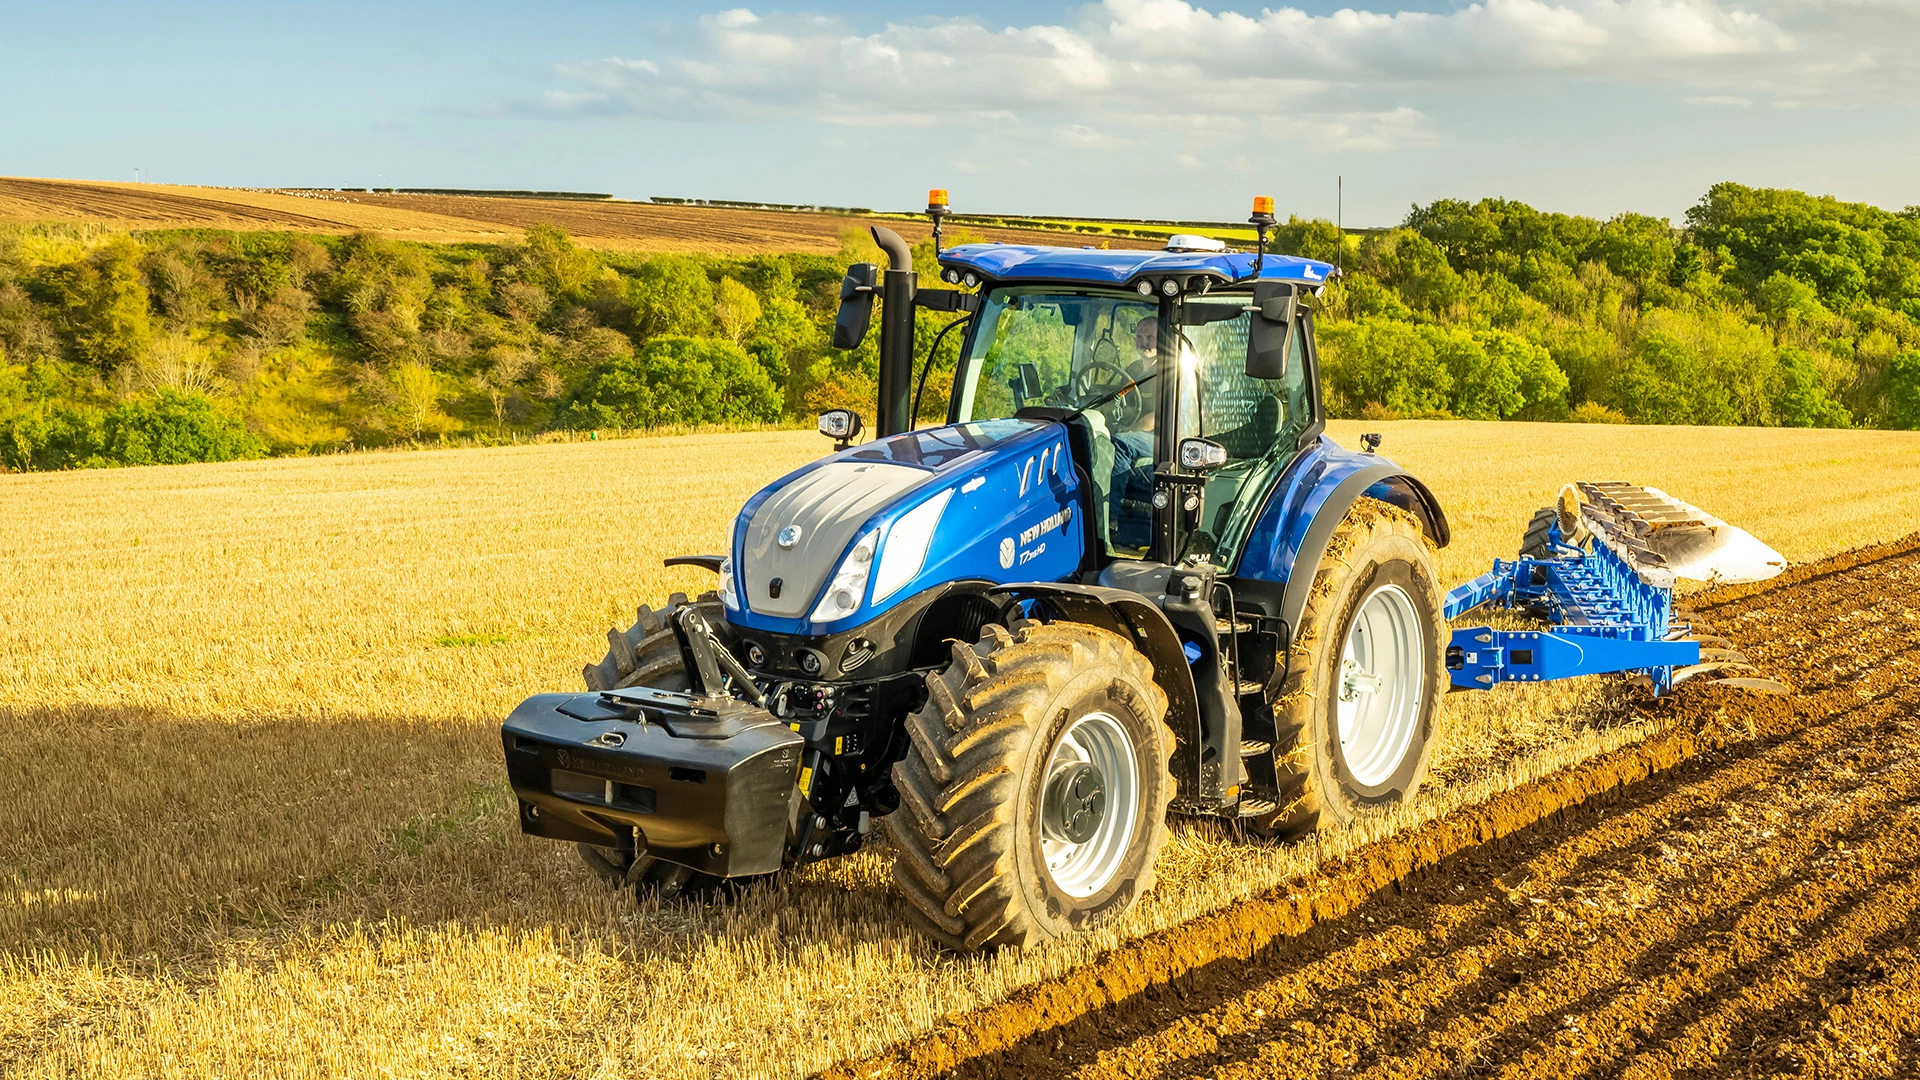 T7 Heavy Duty With PLM Intelligence Tractor efficiently operating in a farming environment